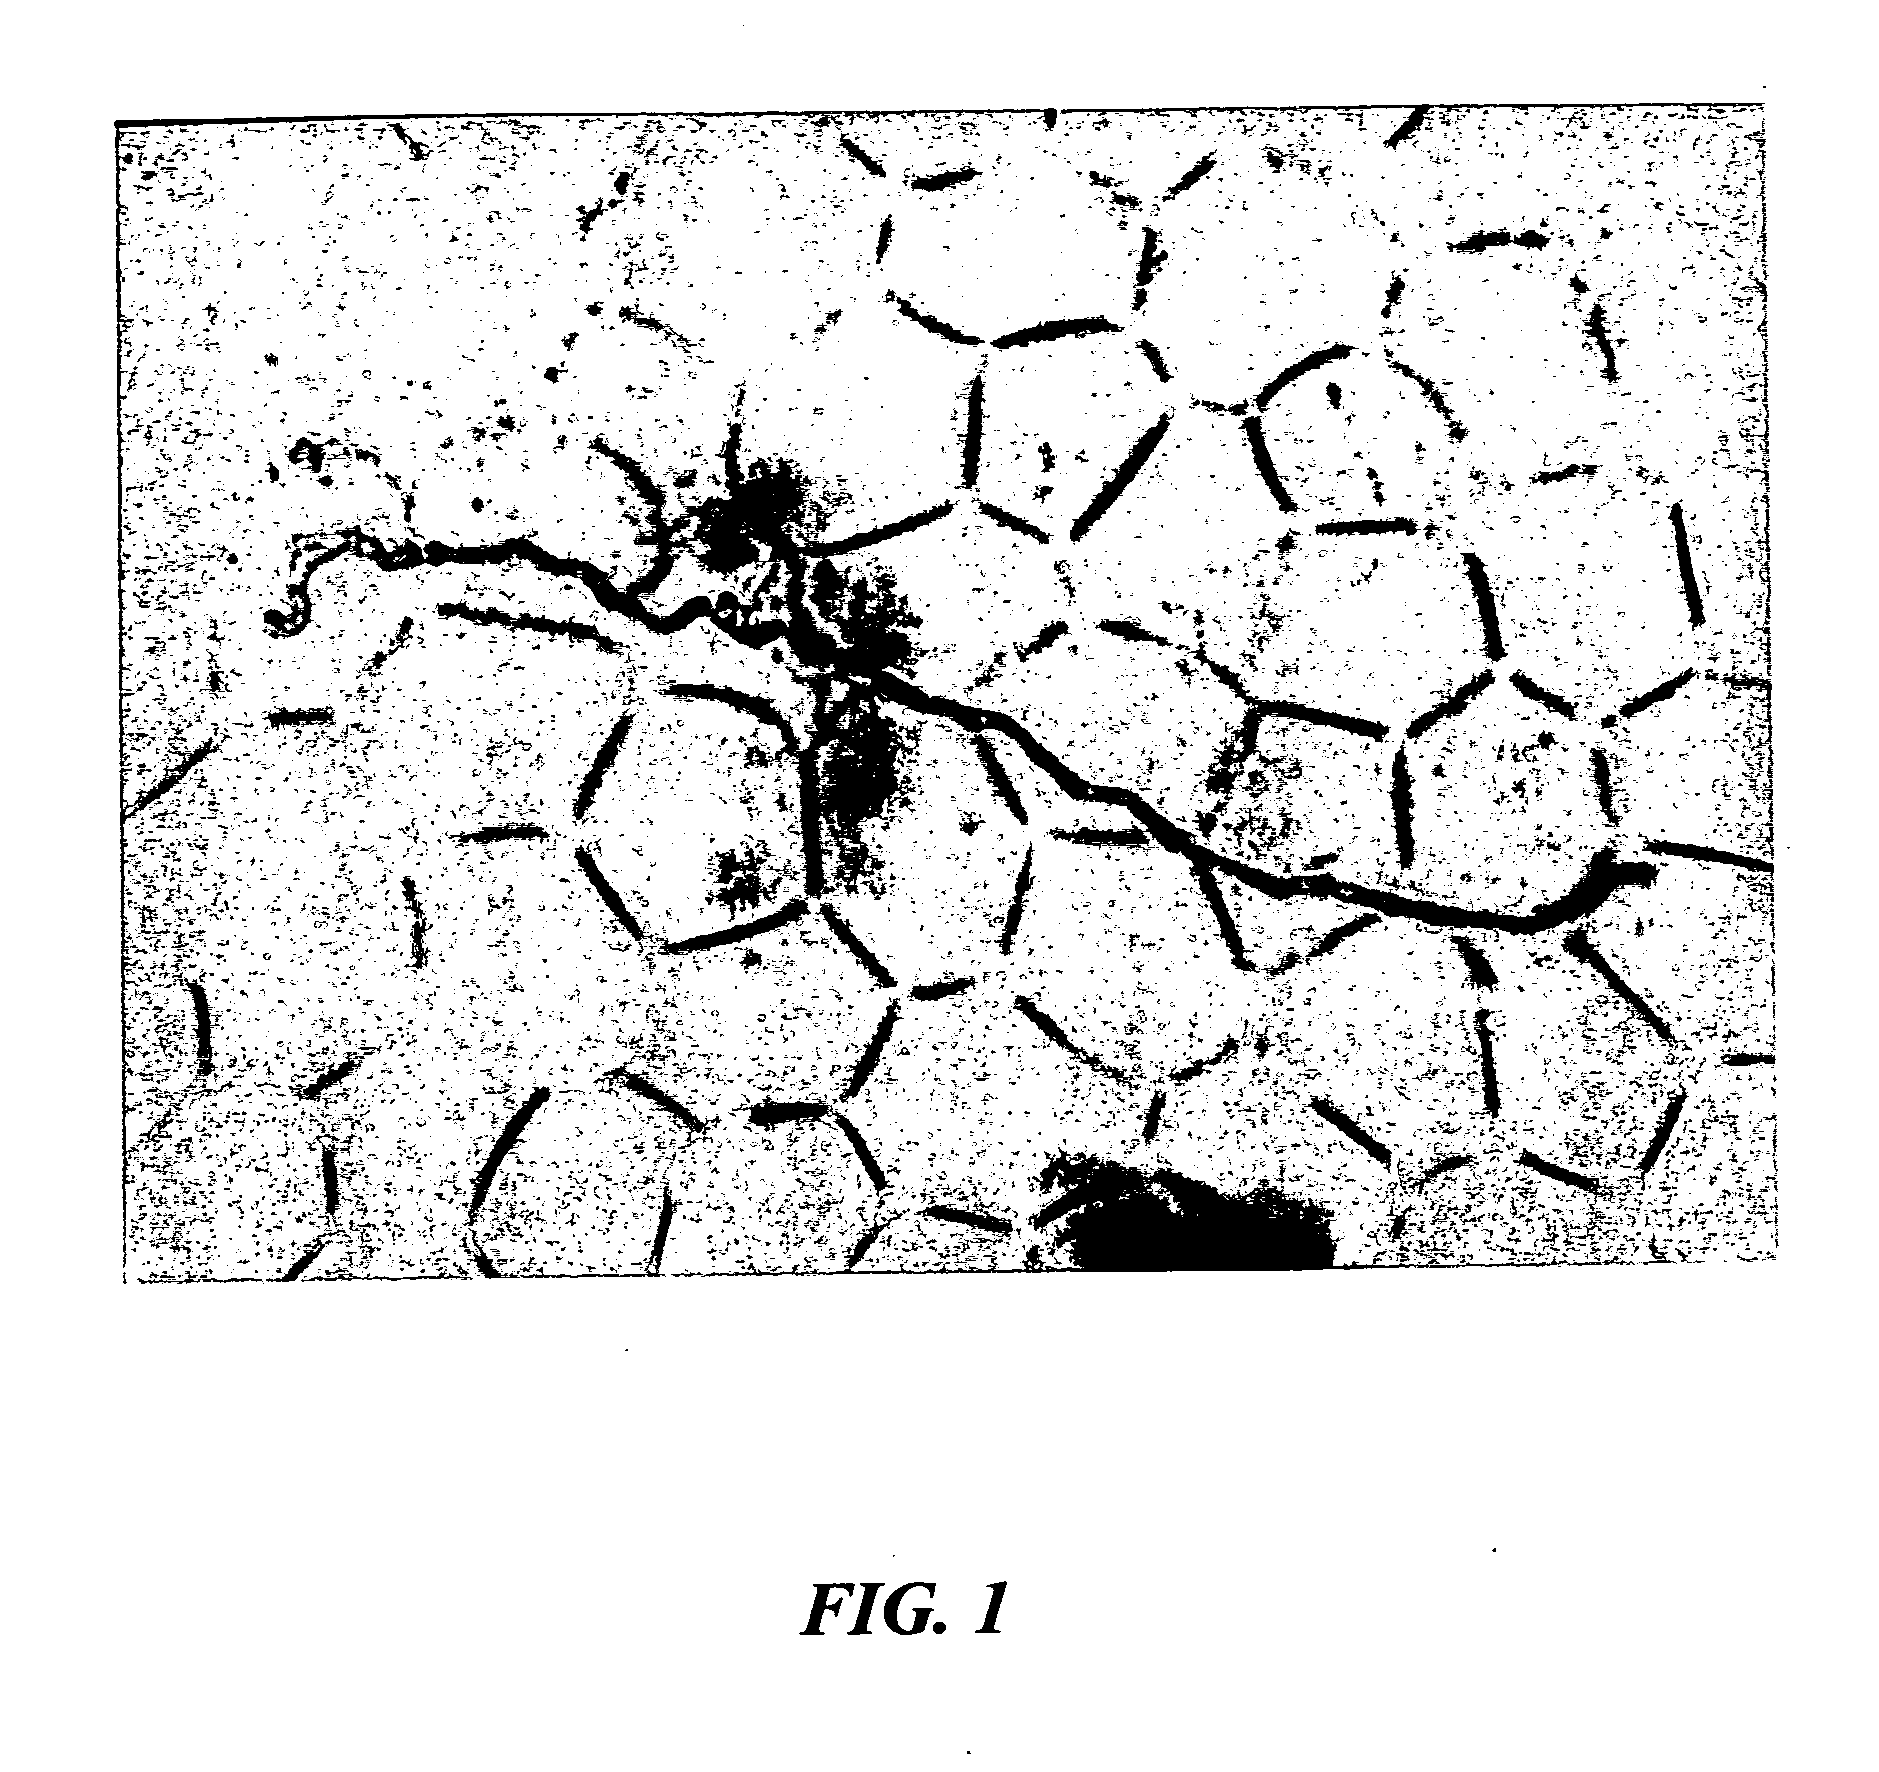 Microorganism staining agent and use thereof